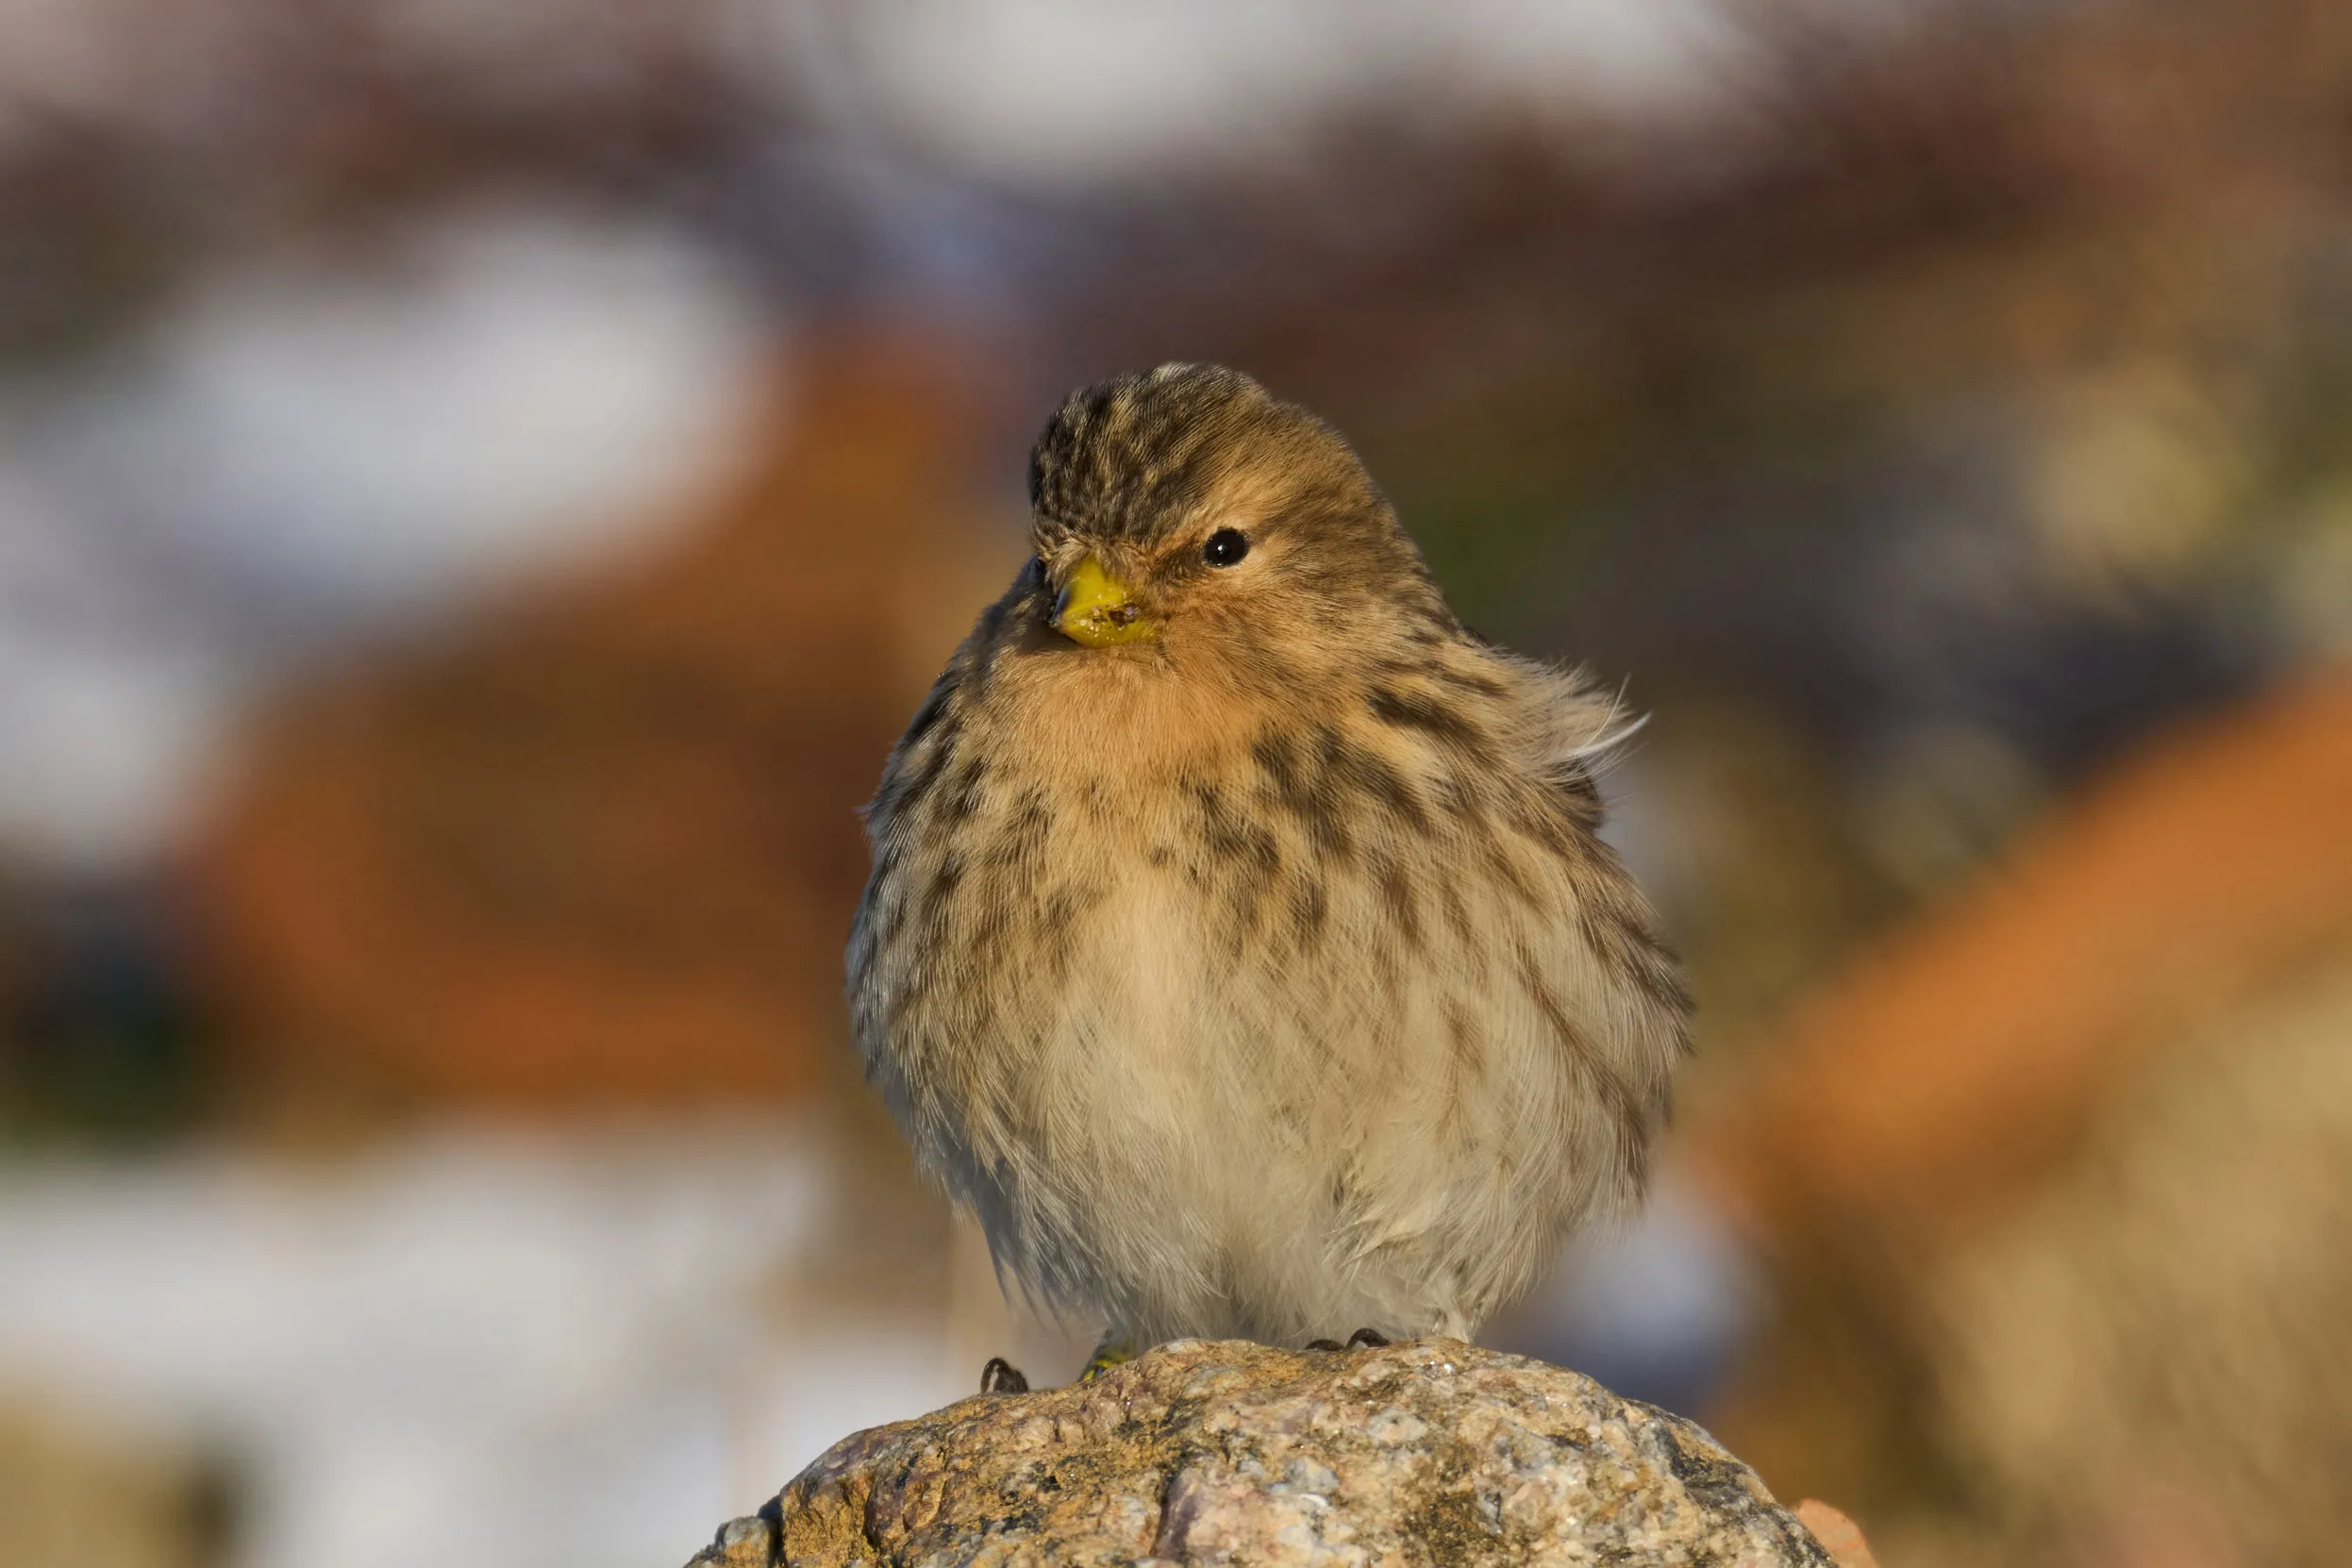 A lone Twite perched on a rock with a somewhat snowy background.